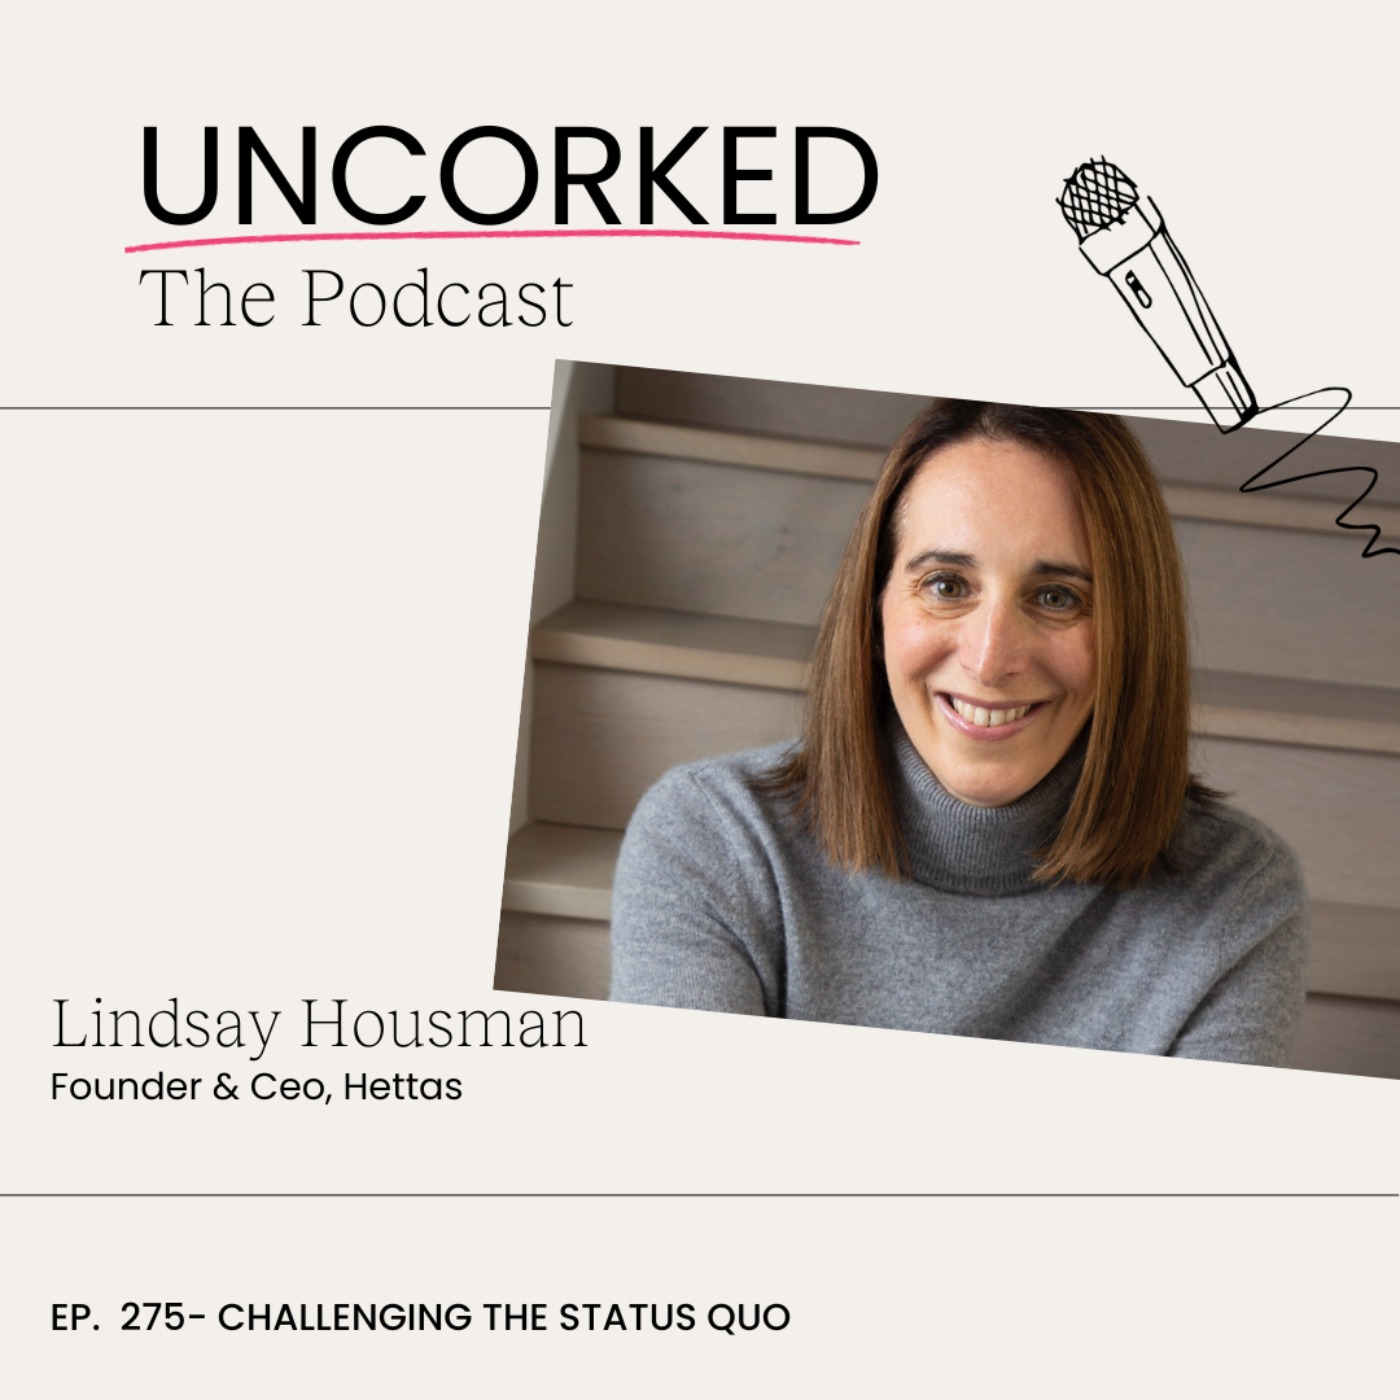 Challenging the Status Quo with Lindsay Housman